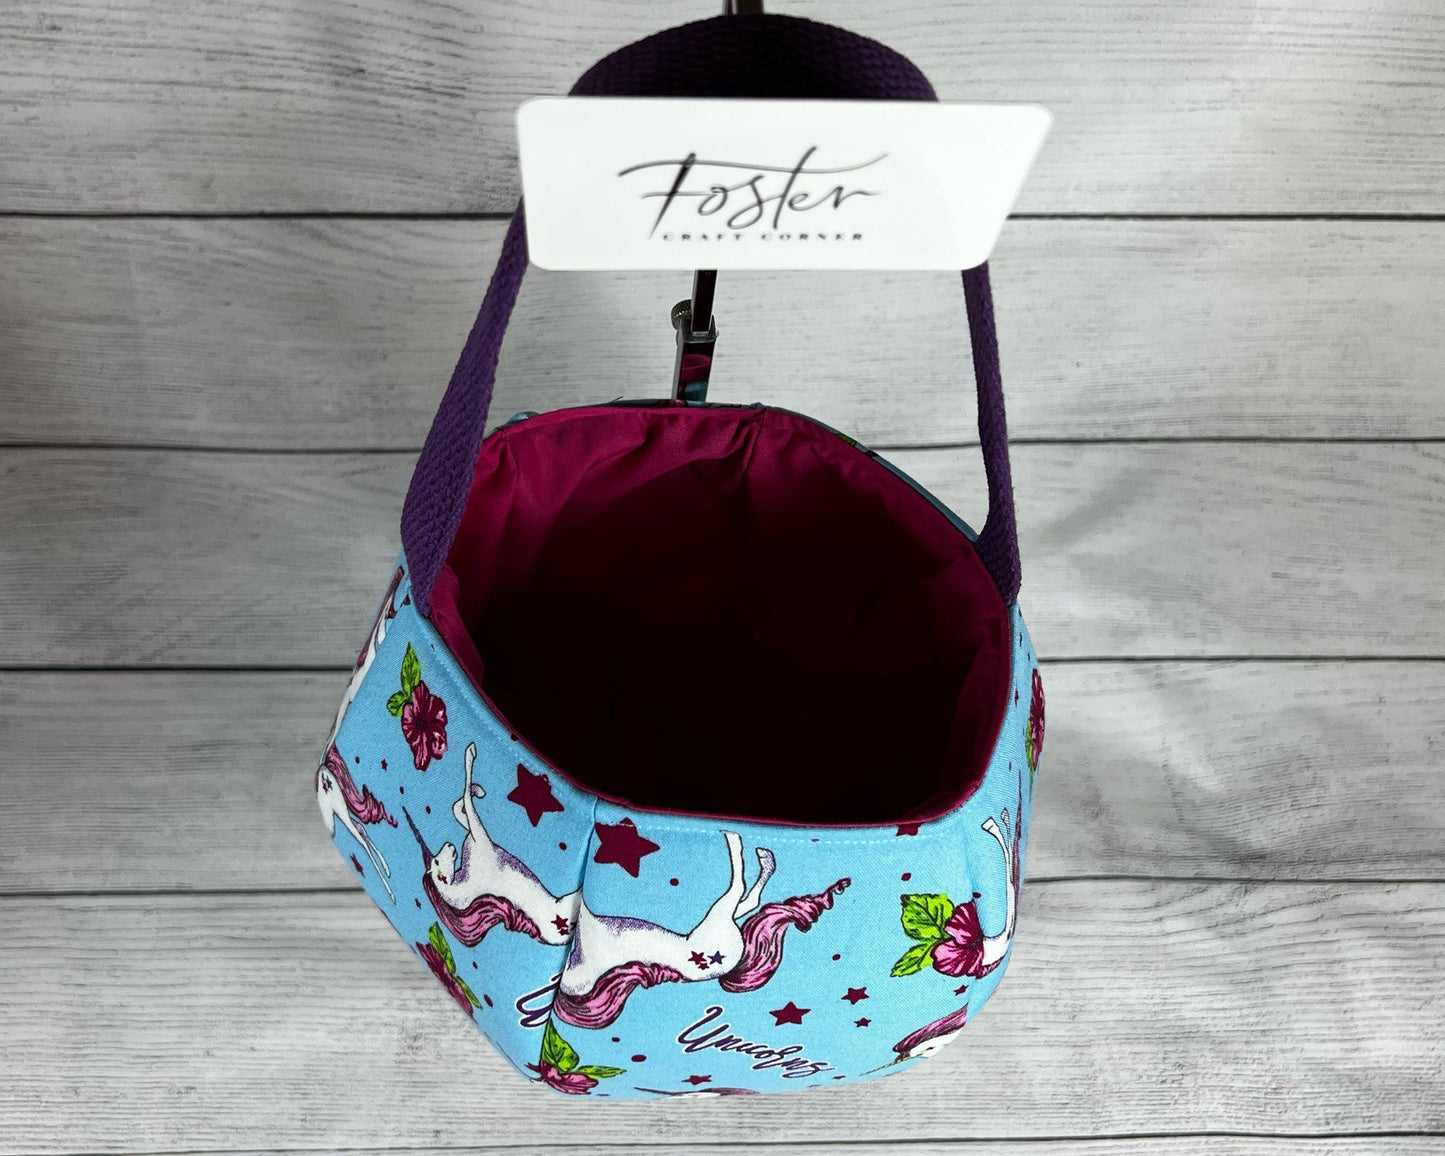 Blue and Pink Colorful Unicorn Tote Bag - Bag - Tote - Unicorn - Horse - Hibiscus - Gift - Everyday - Holiday - Easter - Halloween - Party